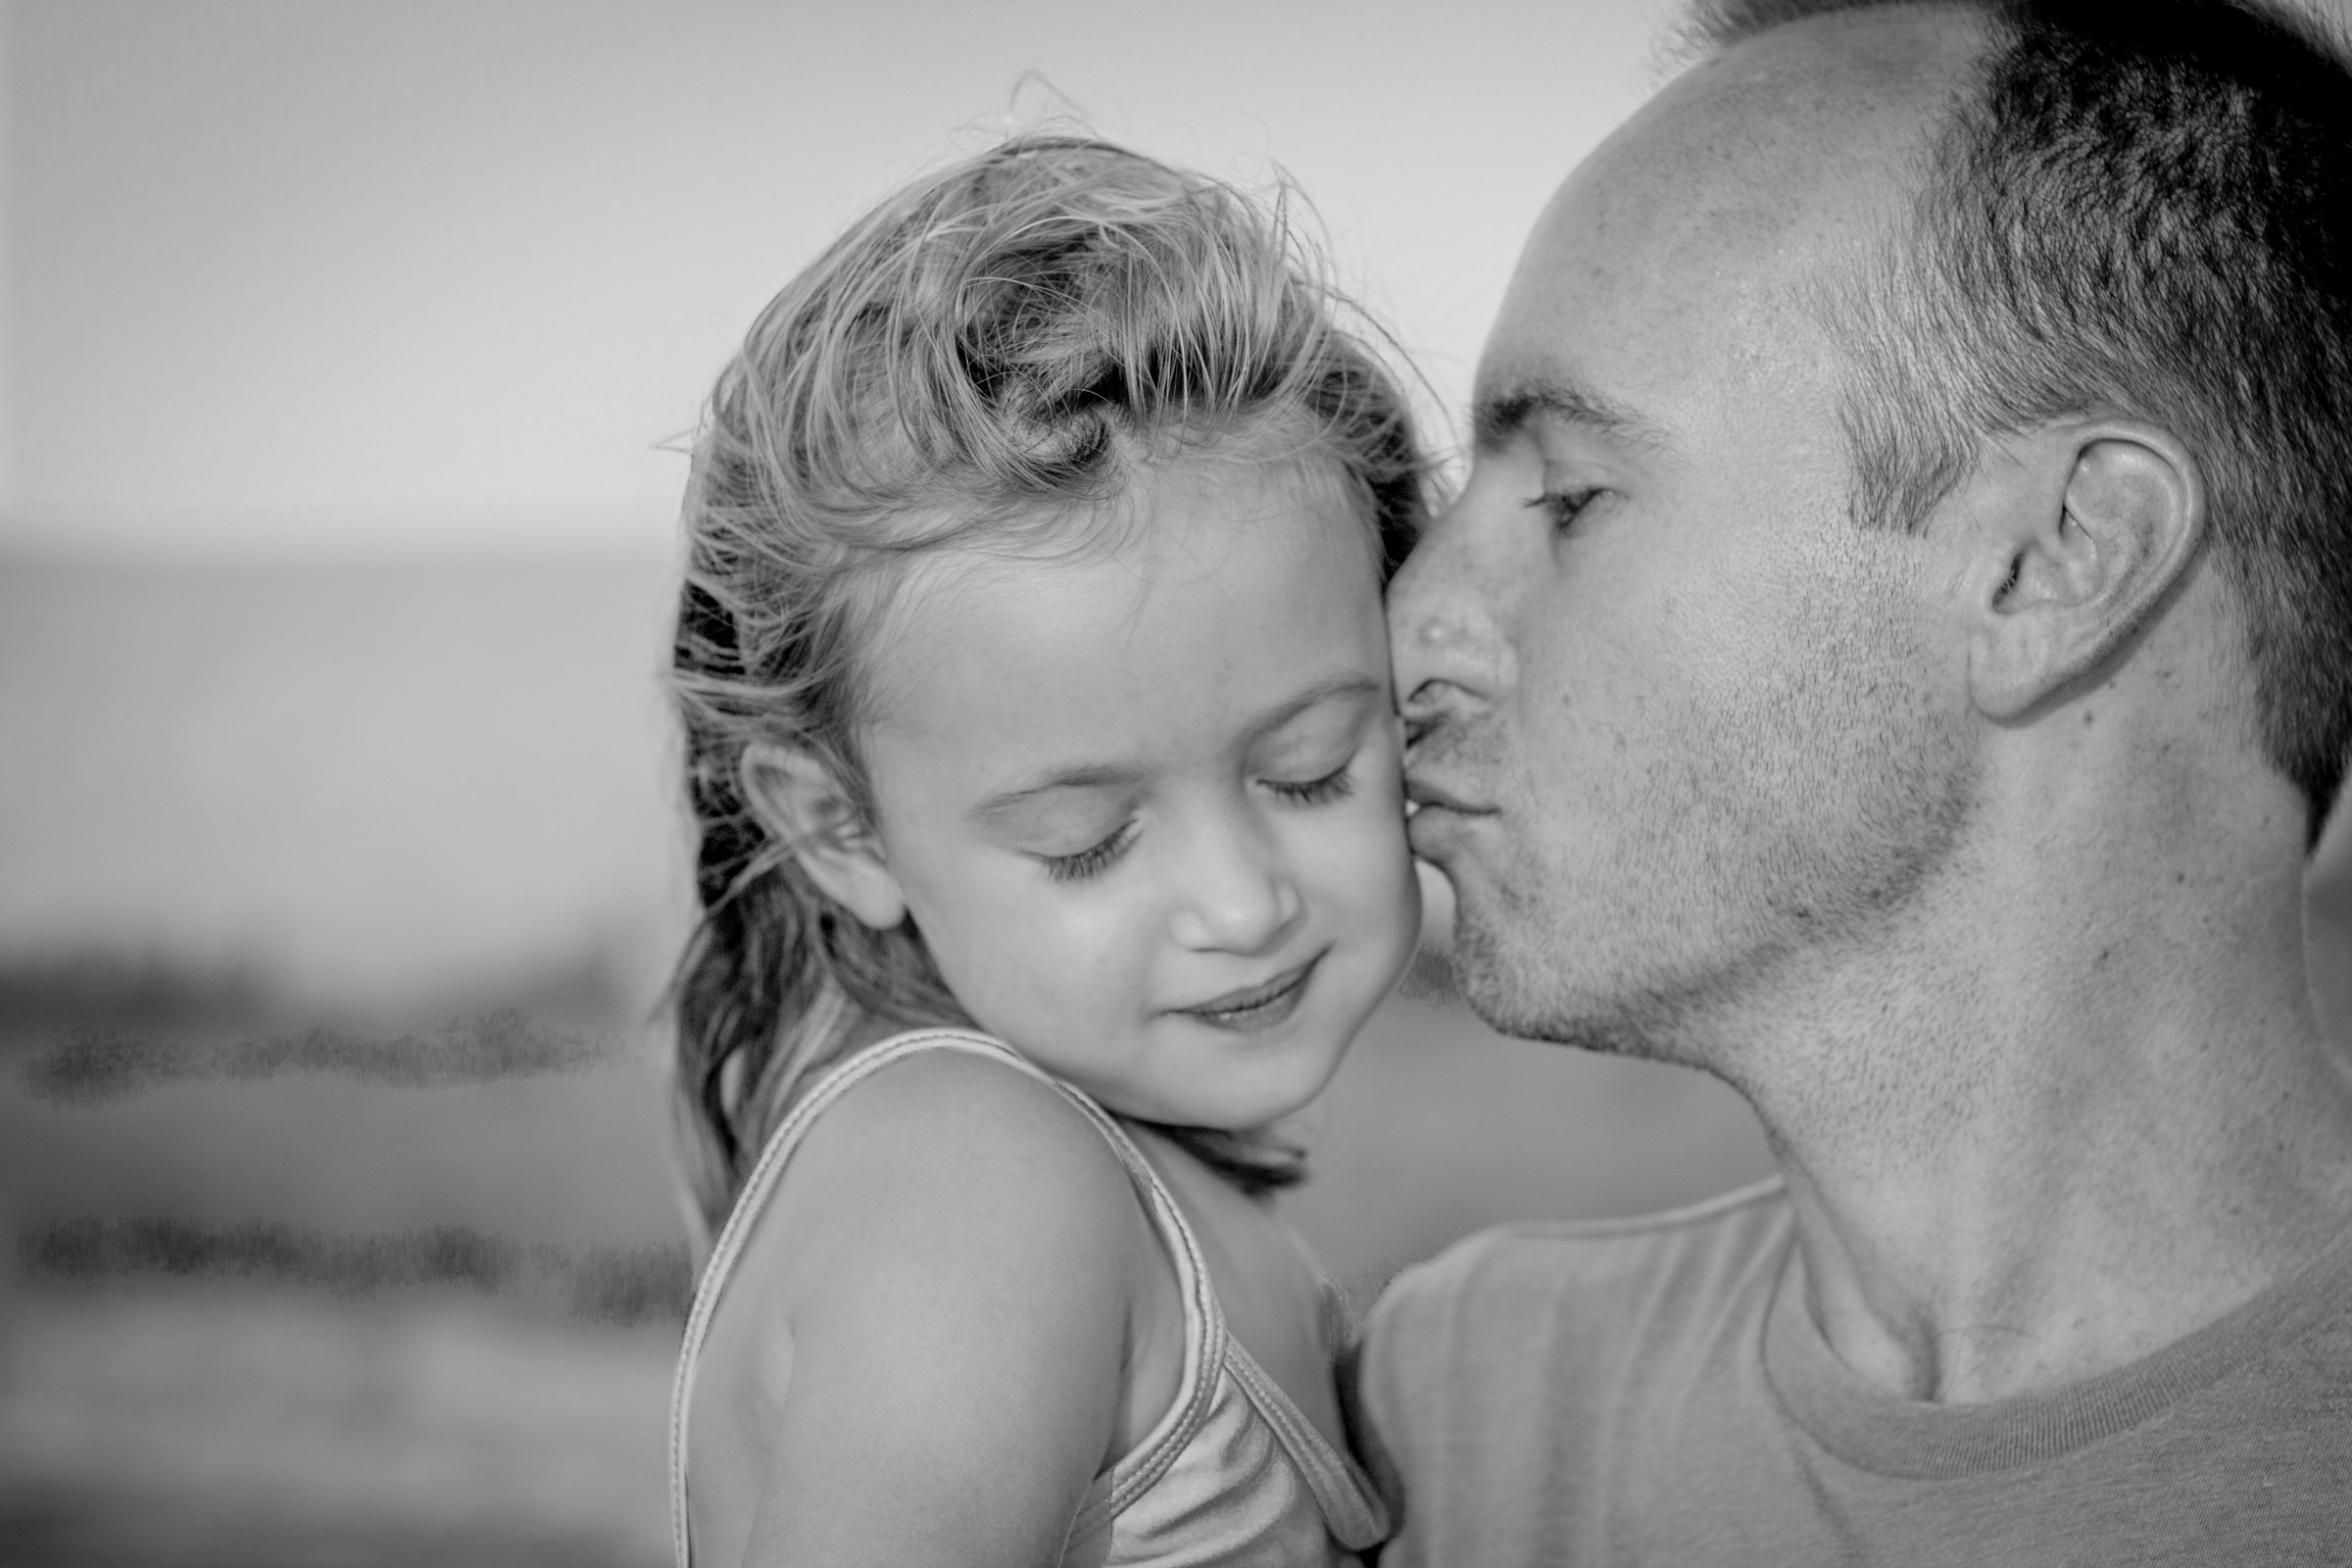 Father kissing his daughter on the cheek | Source: Unsplash